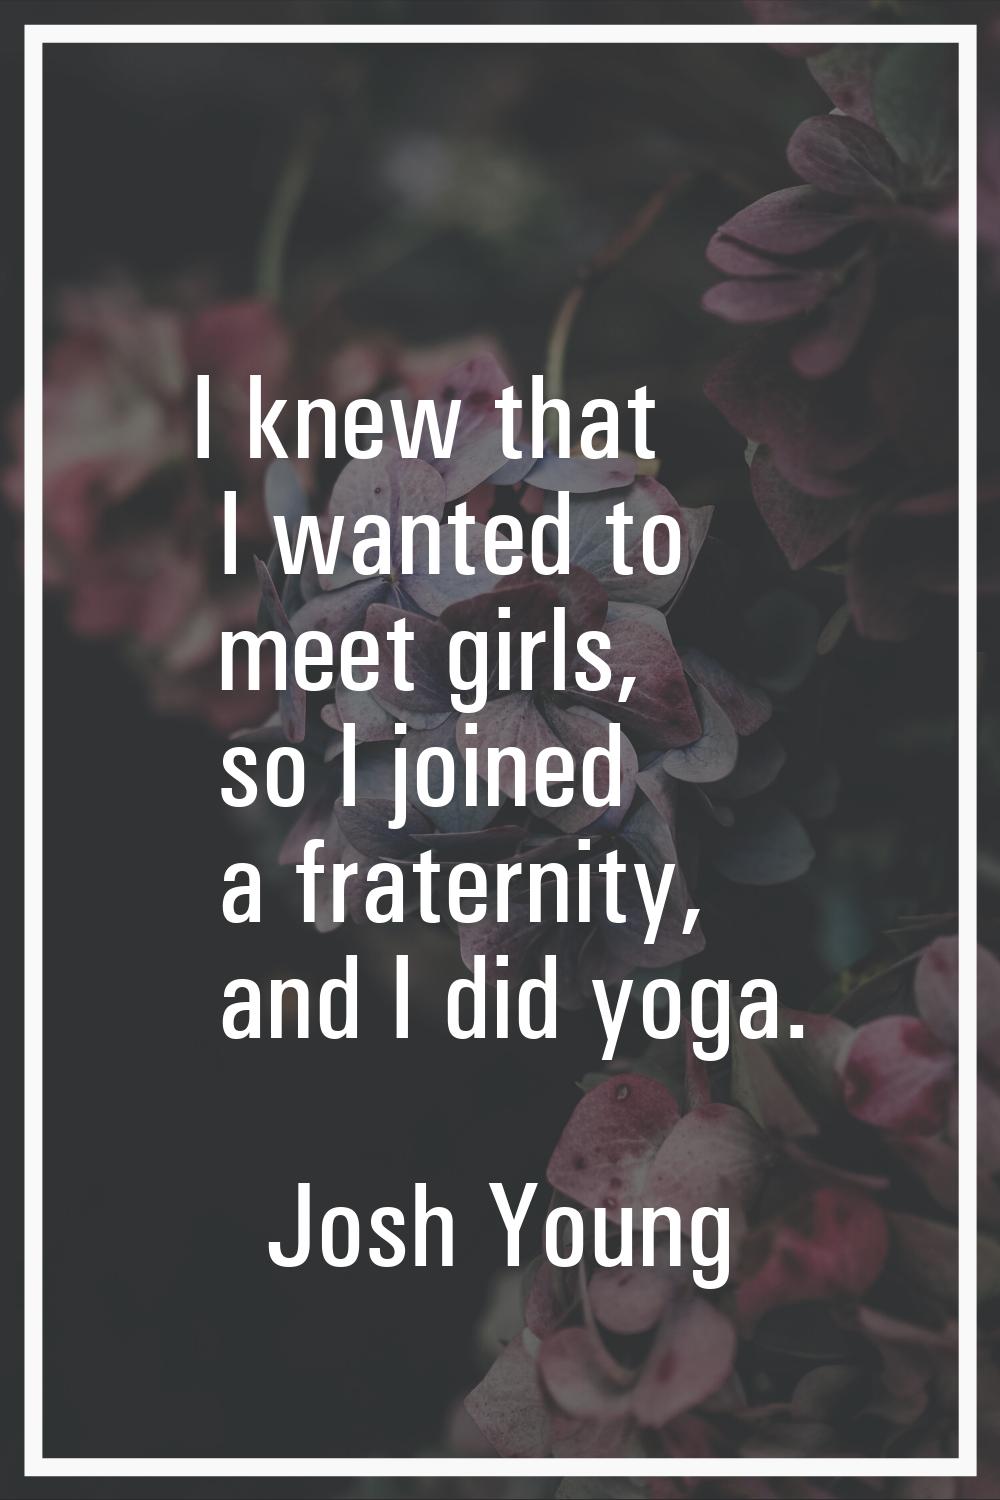 I knew that I wanted to meet girls, so I joined a fraternity, and I did yoga.